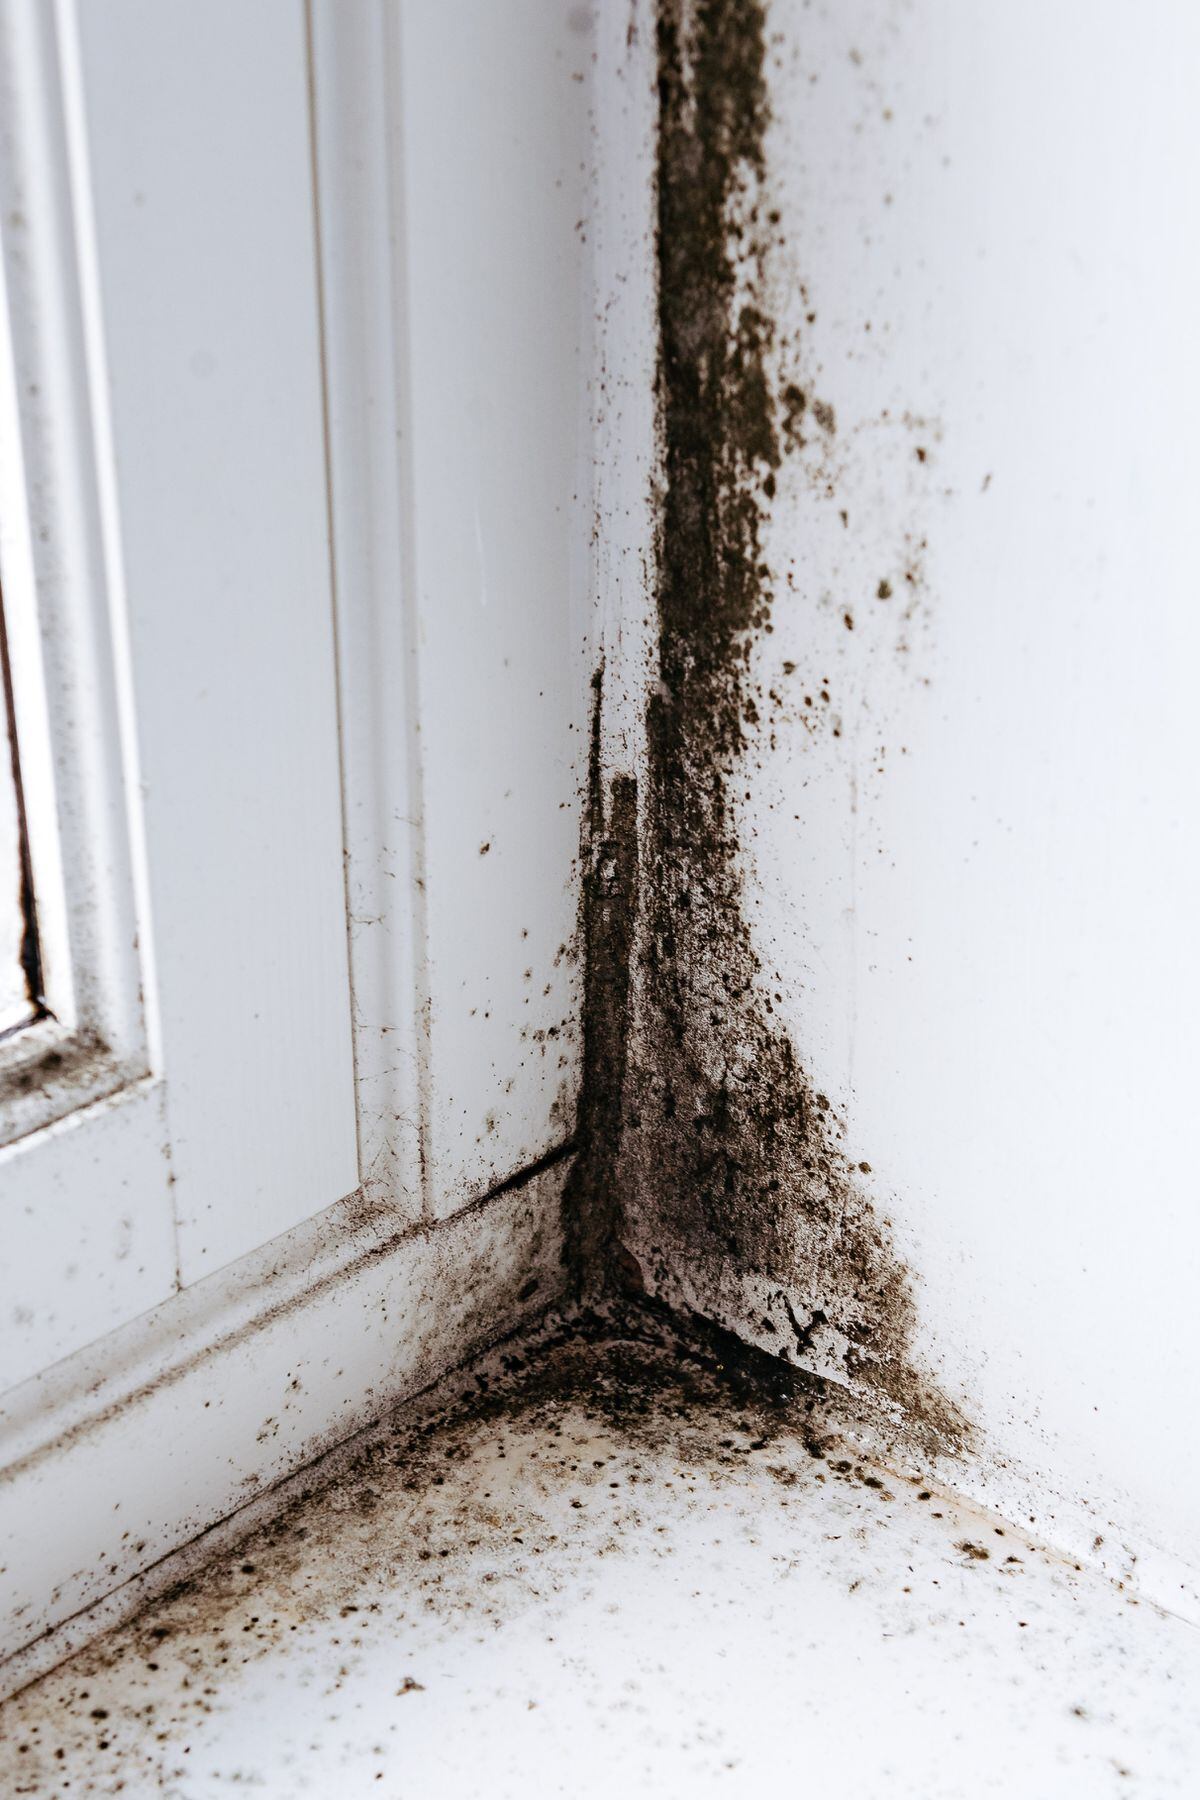 Mould in the house